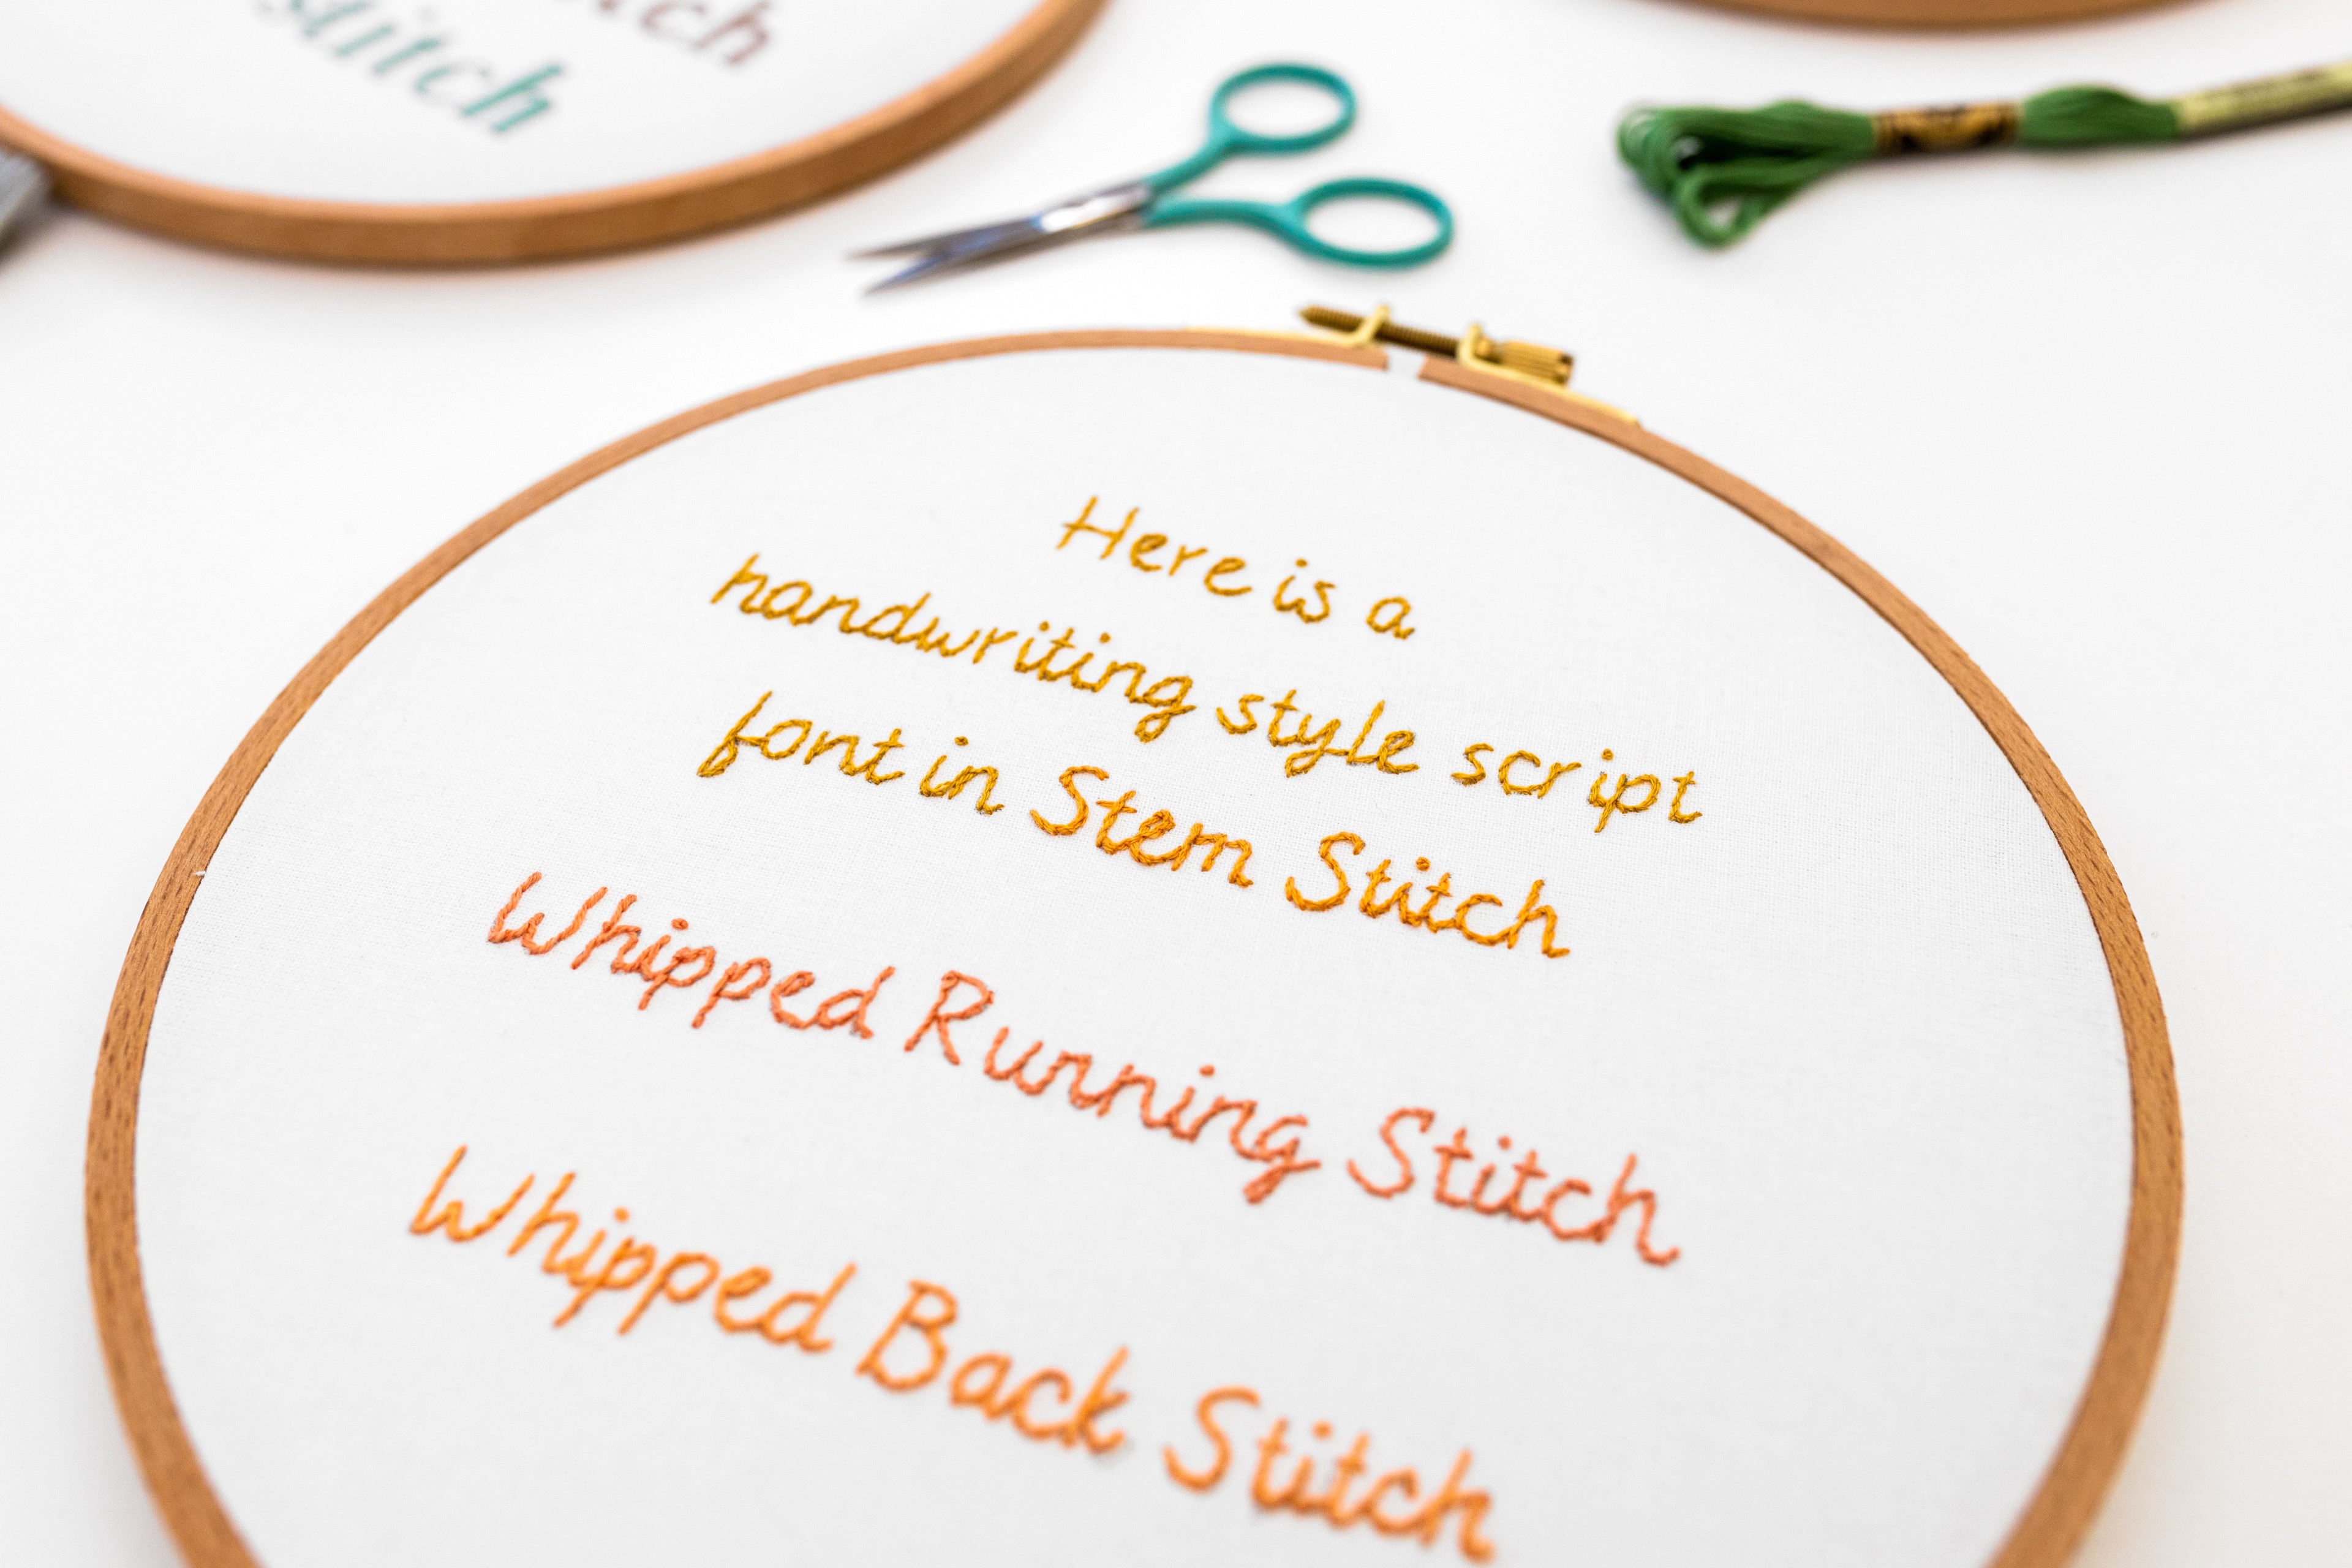 This is an image of a embroidery hoop with stem stitch, running stitch, and whipped back stitch.